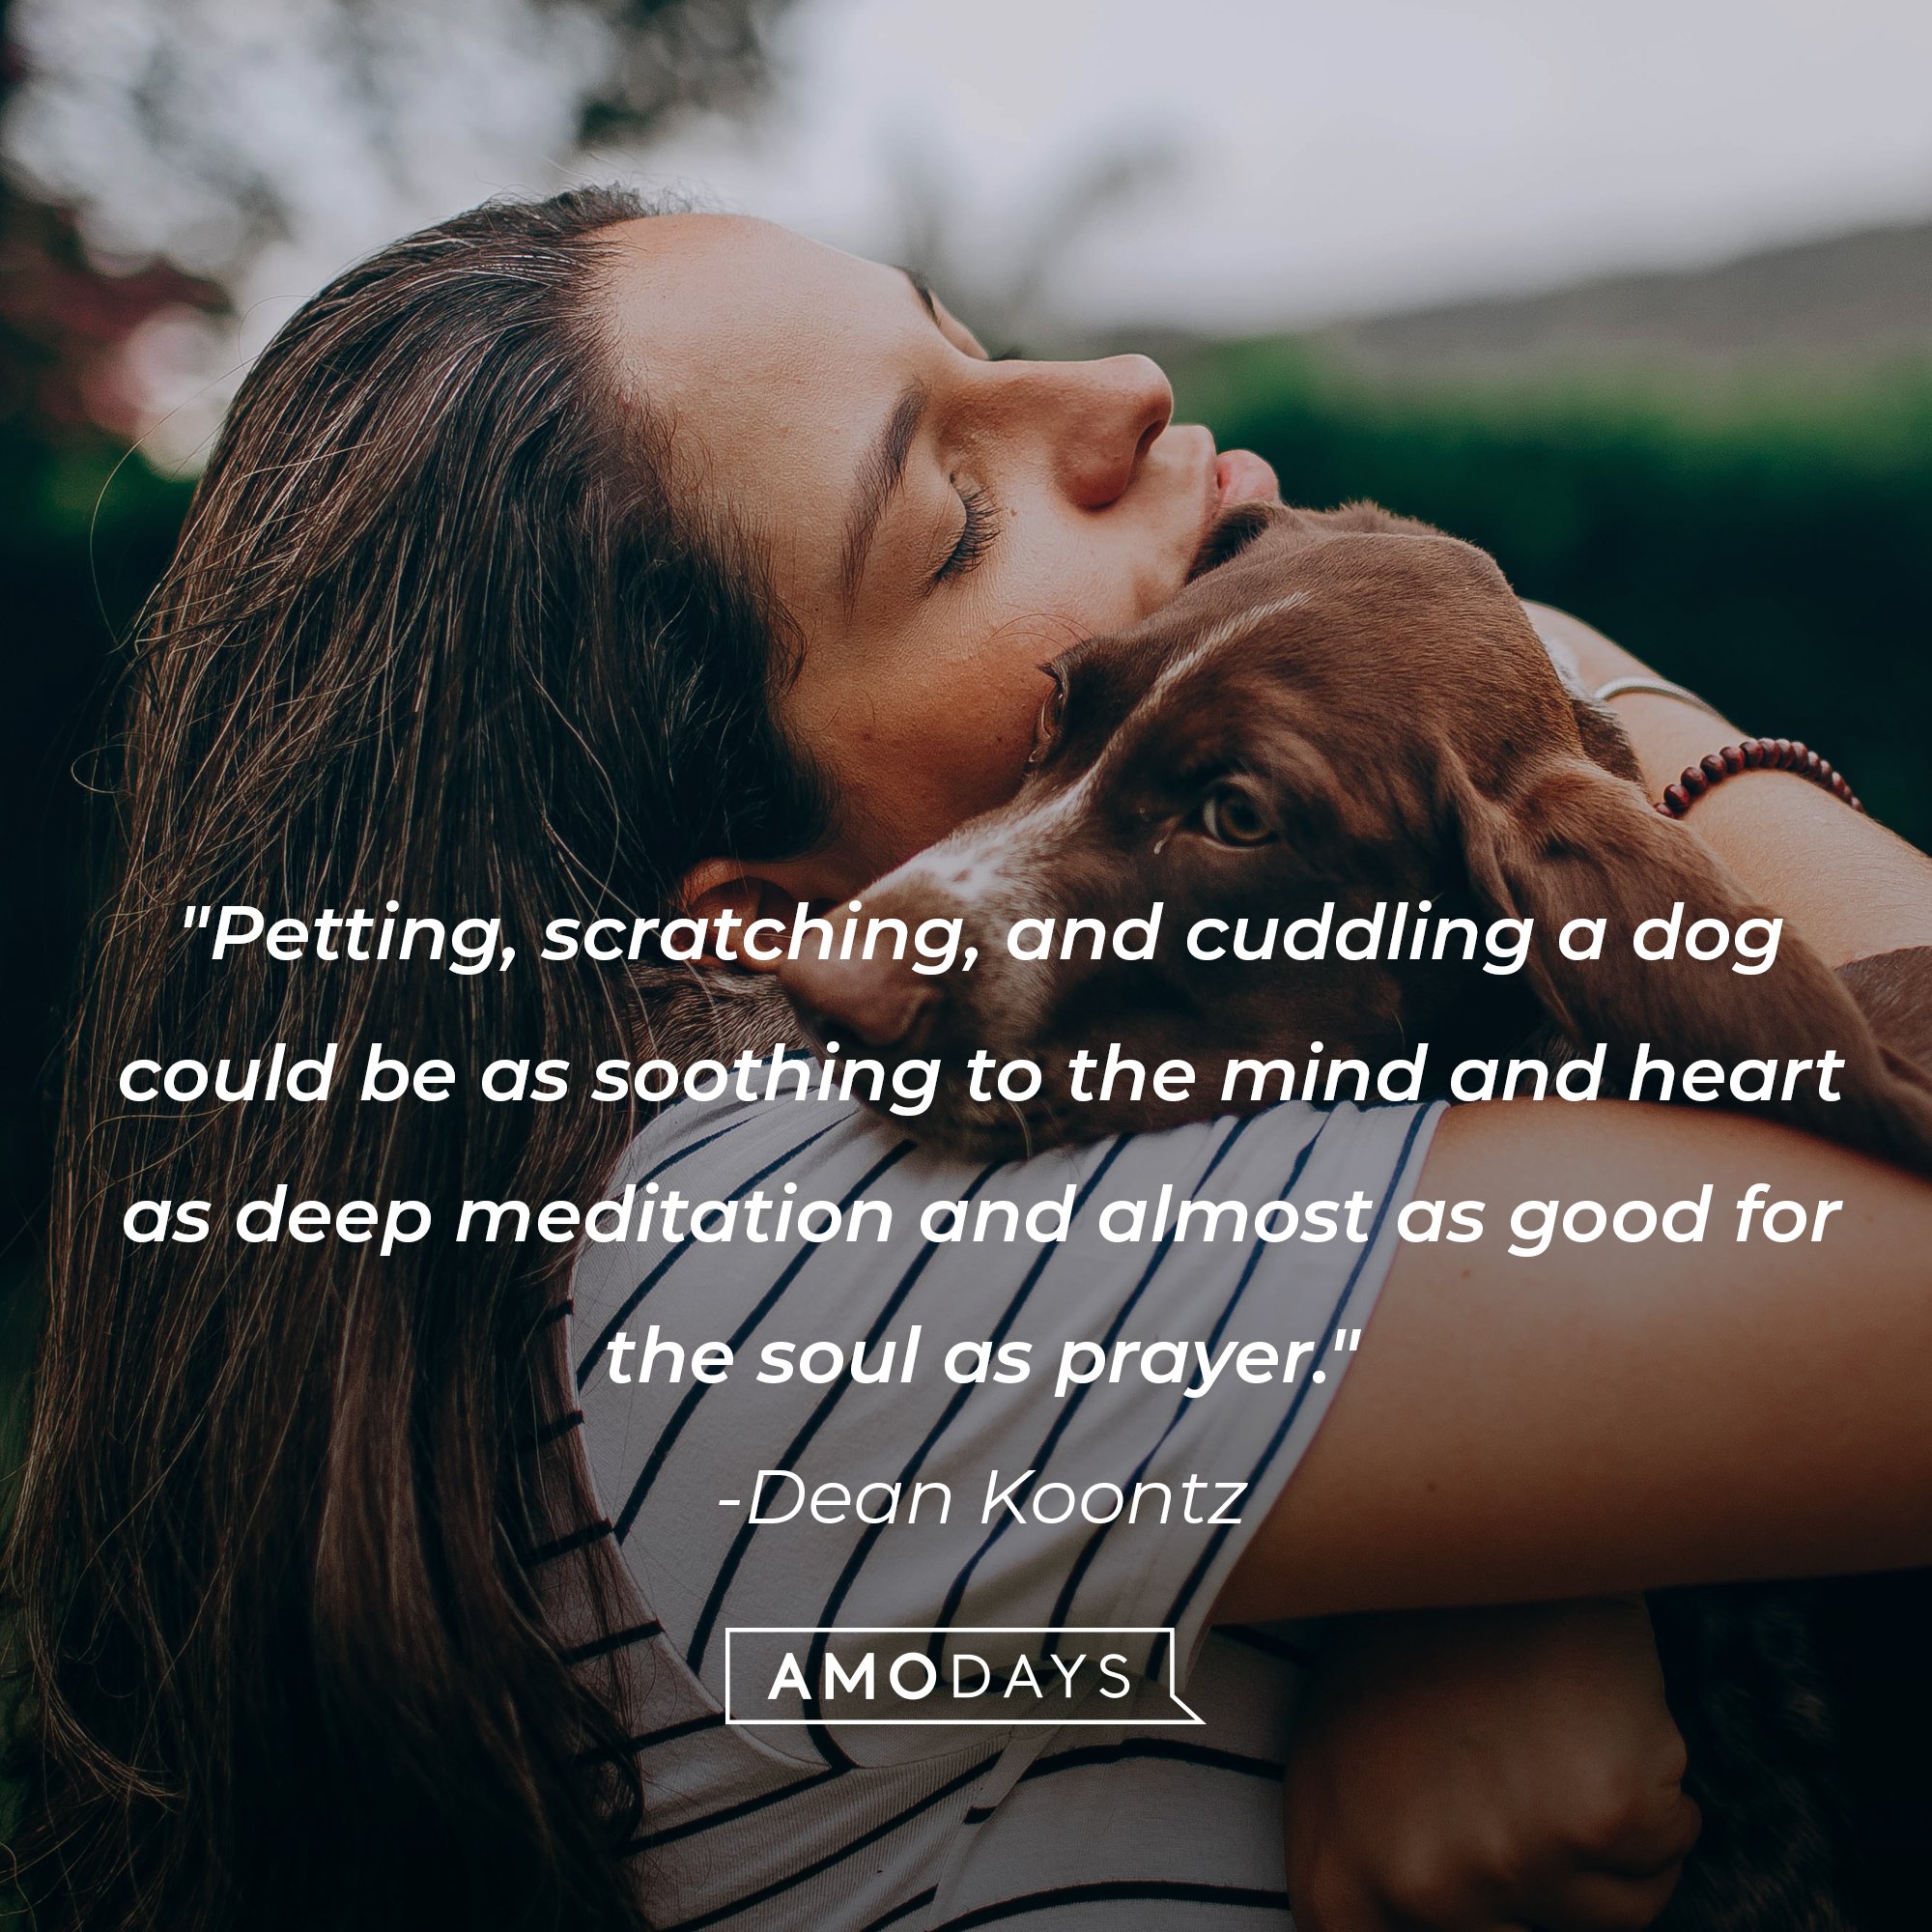 Dean Koontz's quote: "Petting, scratching, and cuddling a dog could be as soothing to the mind and heart as deep meditation and almost as good for the soul as prayer." | Image: AmoDays